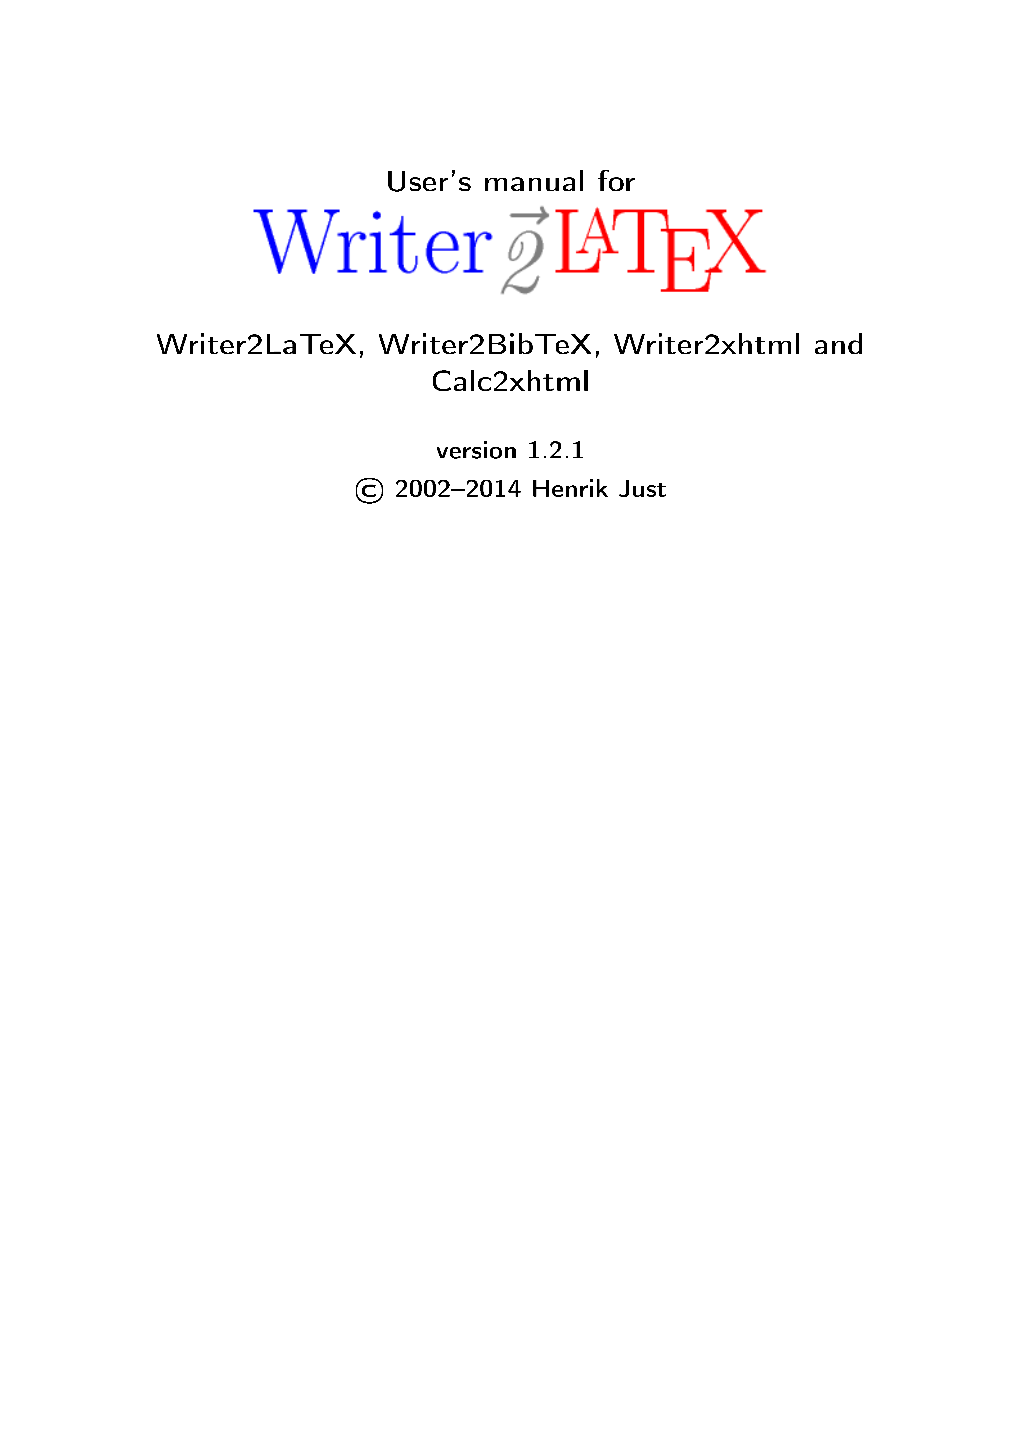 User's Manual for Writer2latex, Writer2bibtex, Writer2xhtml and Calc2xhtml